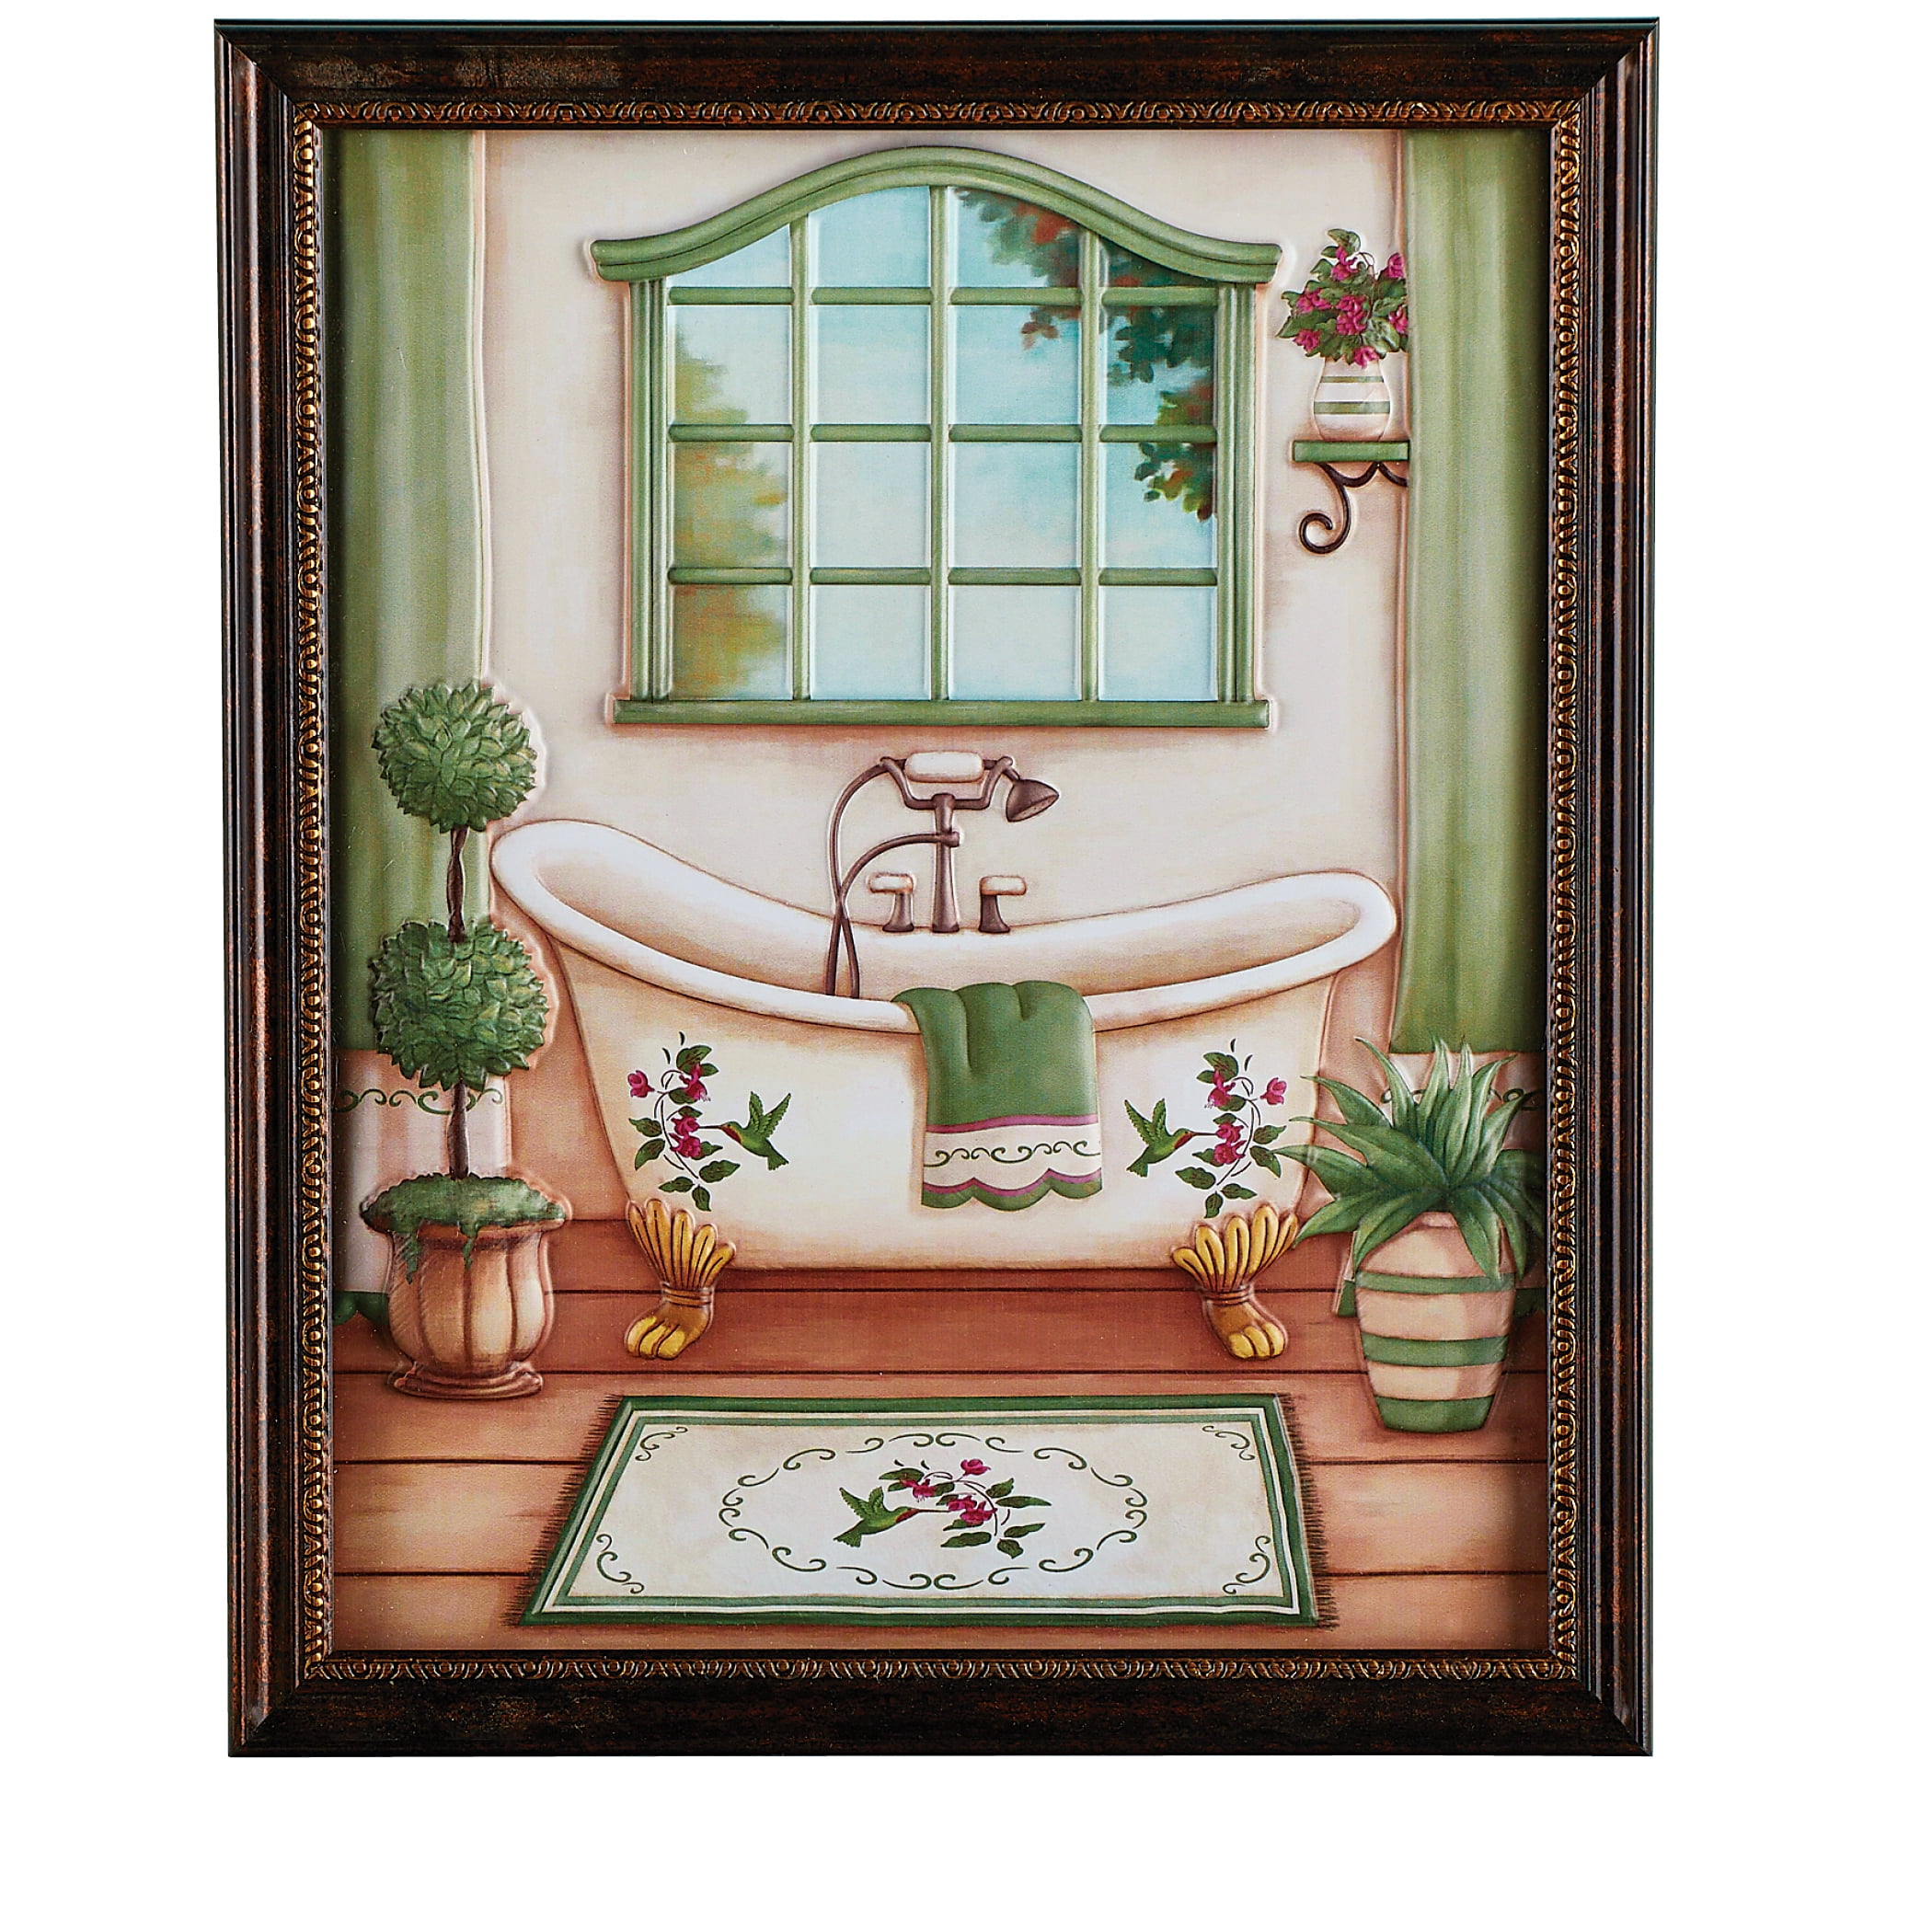 Charming & Cool Vintage Bathroom Framed Wall Art Picture